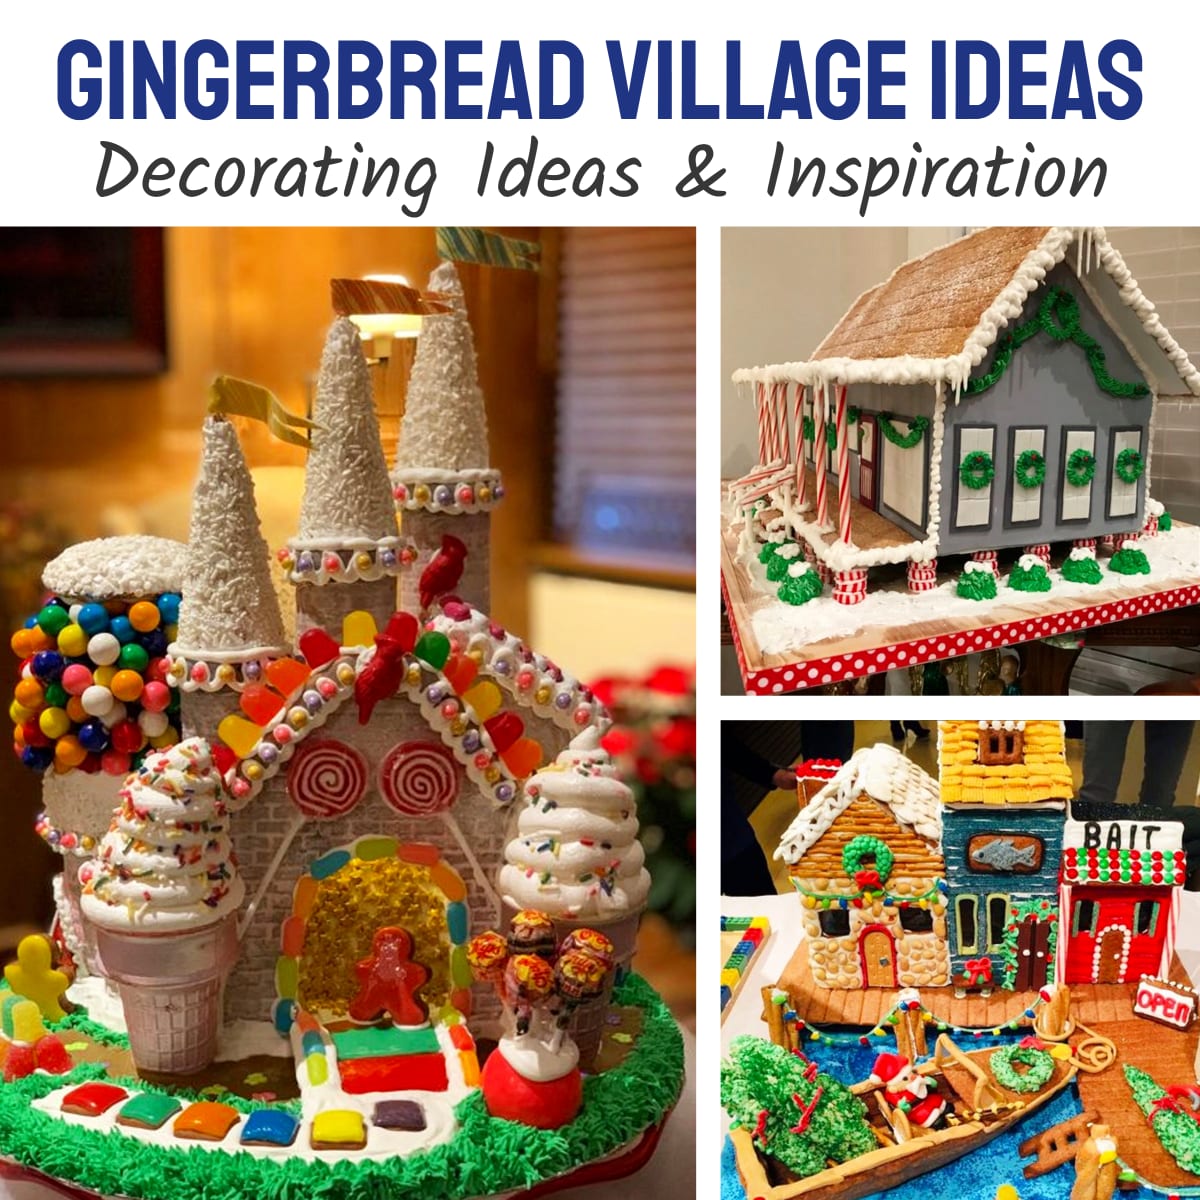 gingerbread village ideas for Christmas - gingerbread house decorating ideas and inspiration